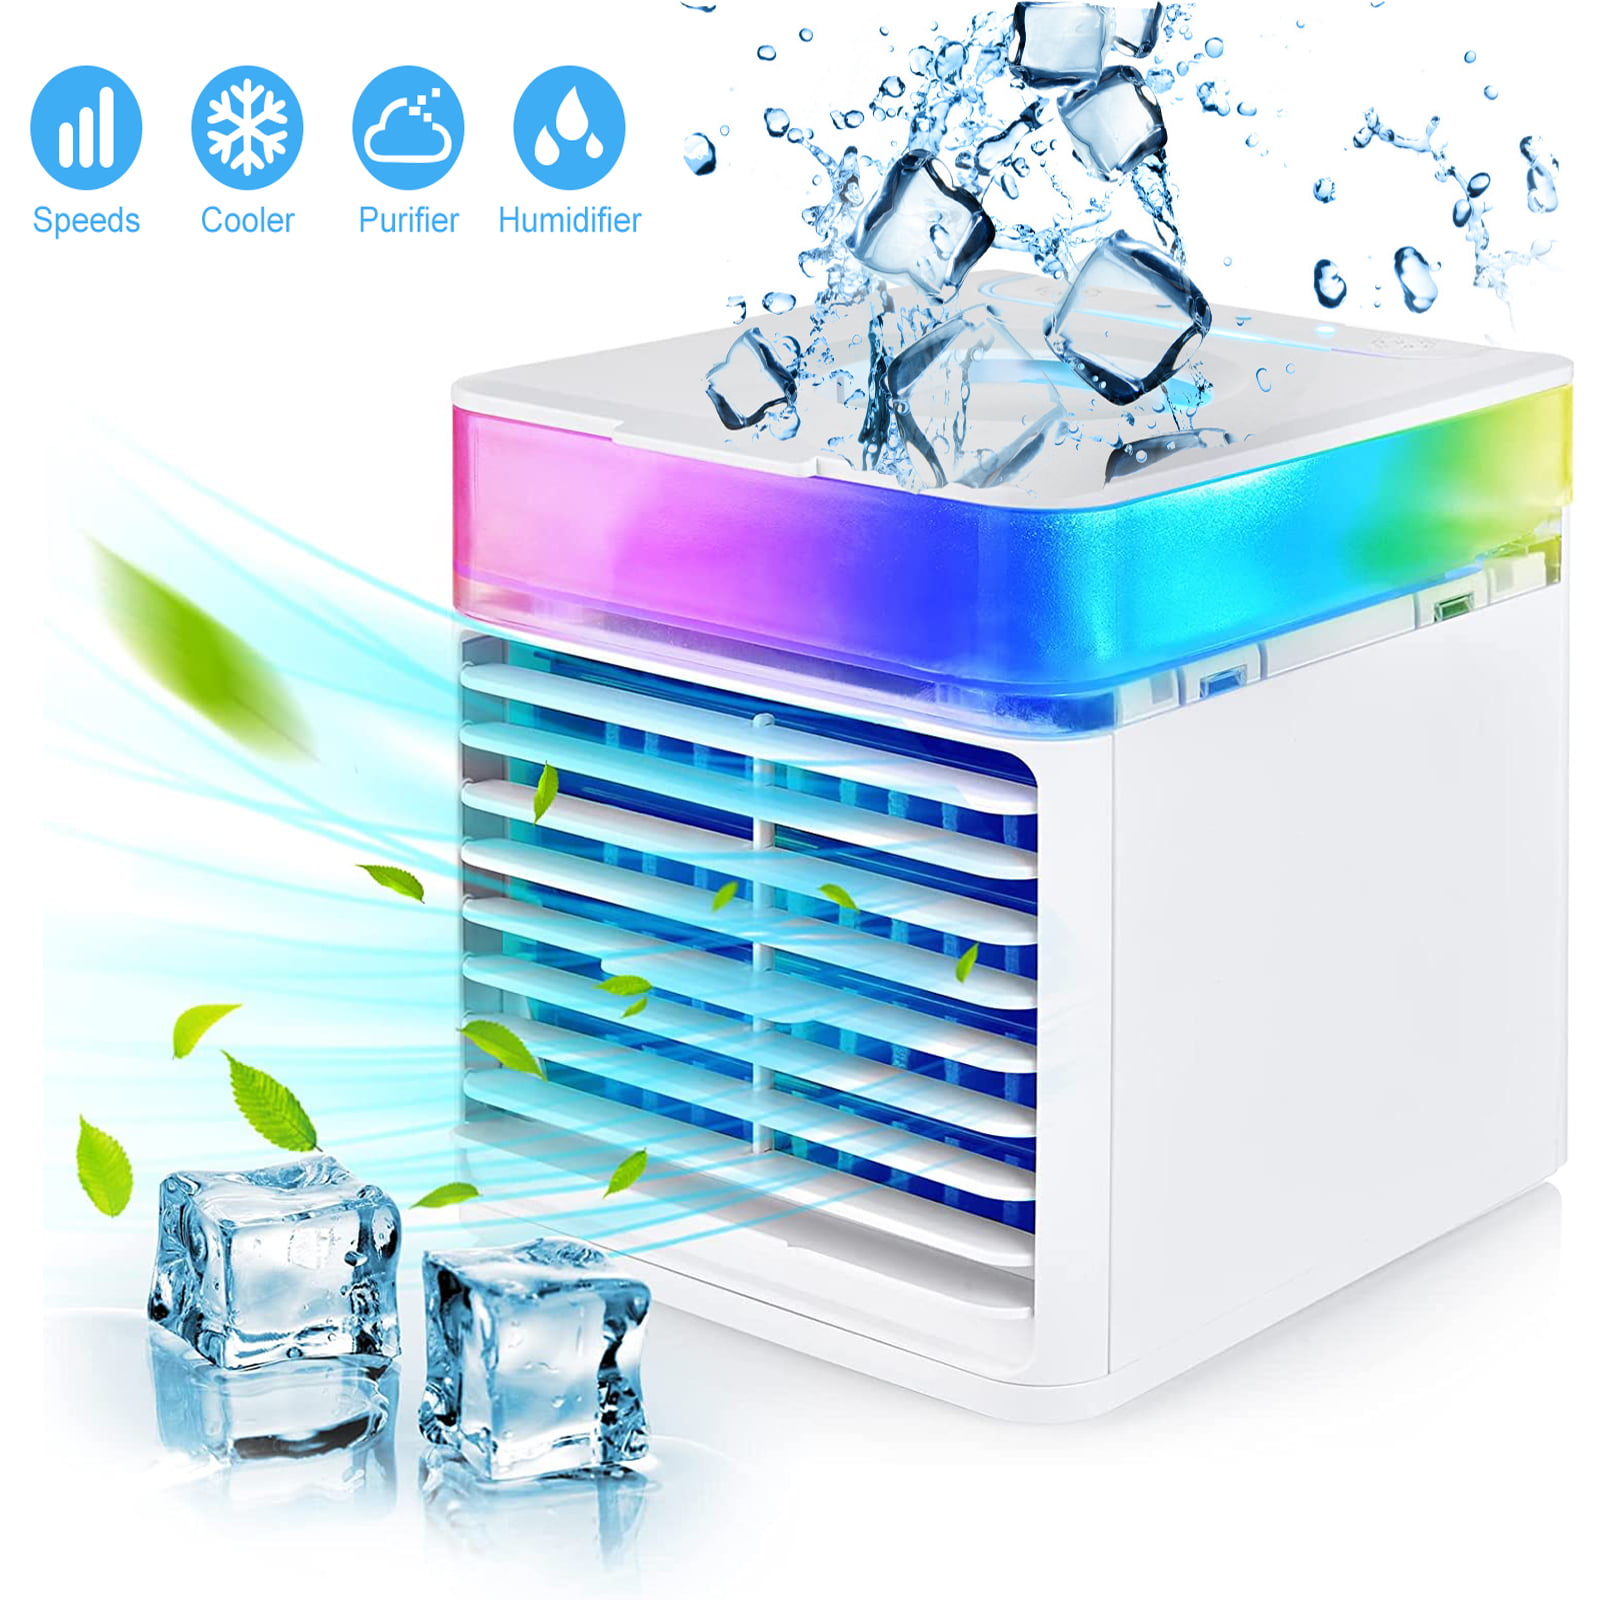 Mini Air Cooler Portable Air Conditioner 4 in 1 Air Cooler & Humidifier & Purifier Evaporative Cooler with 7 Colors LED Lights and 3 Adjustable Speeds for Home Travel Office Bedroom 